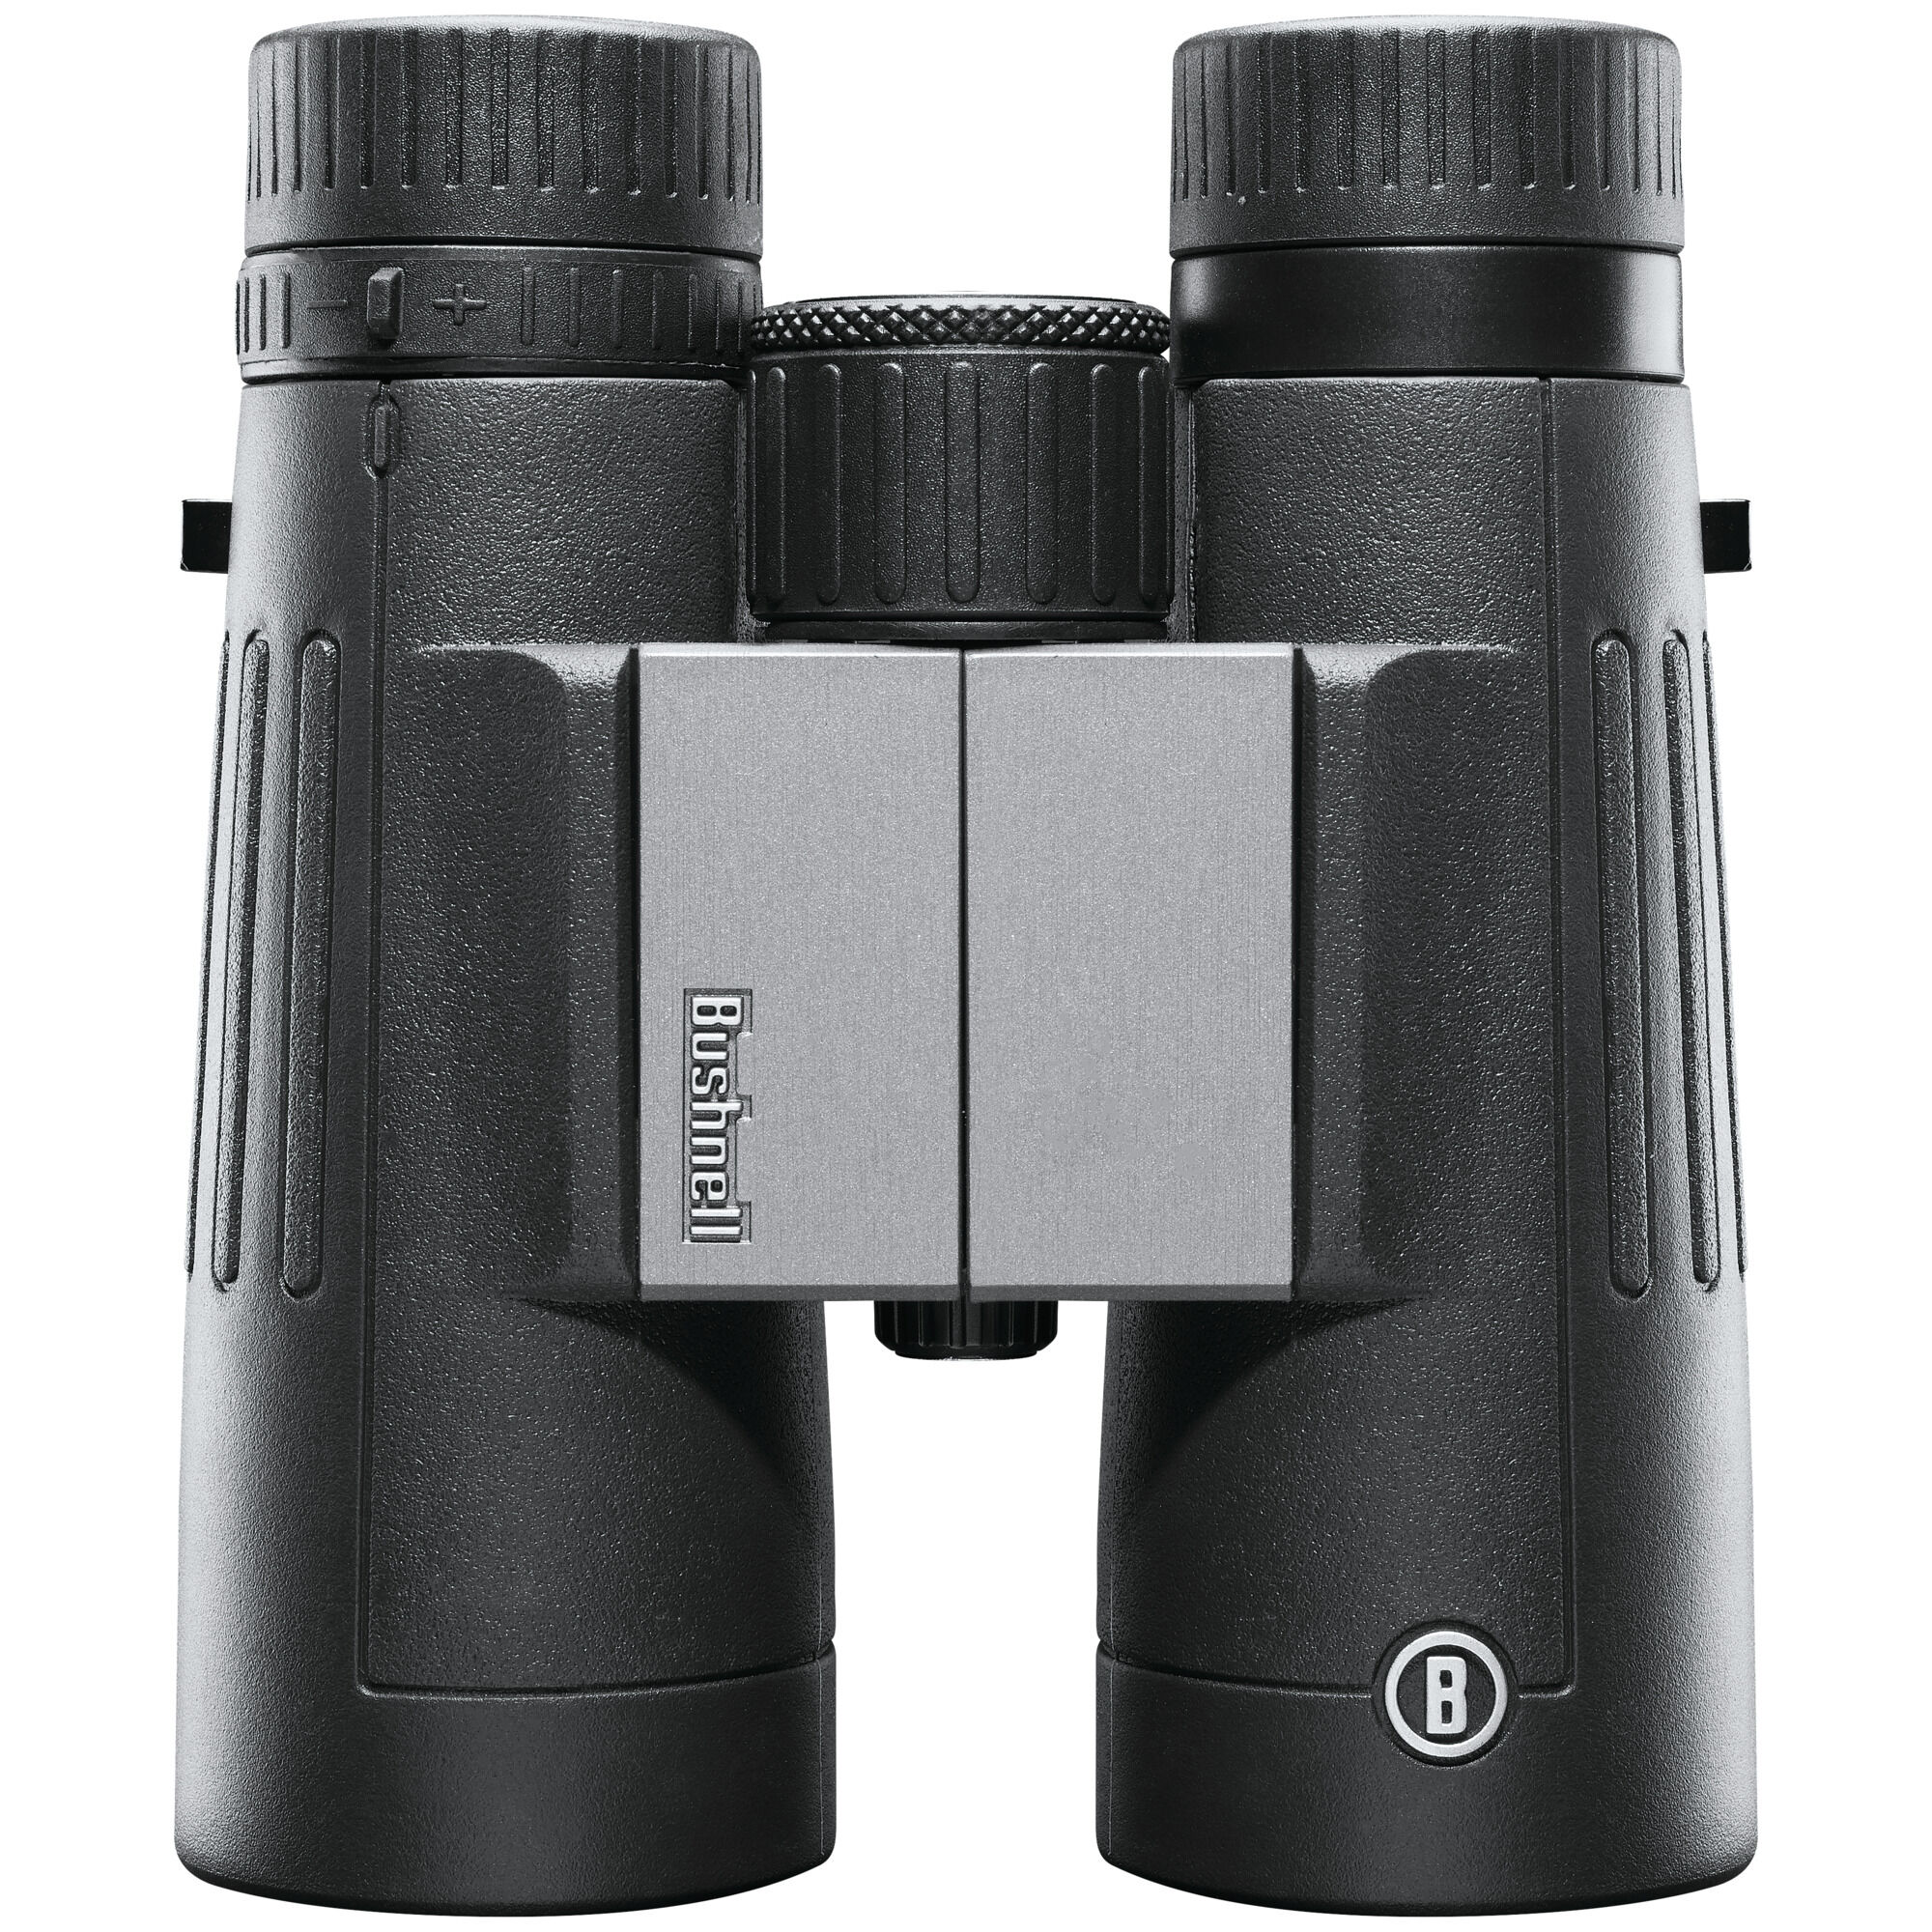 Powerview 2 Compact Binoculars, 10x42 Magnification| Bushnell